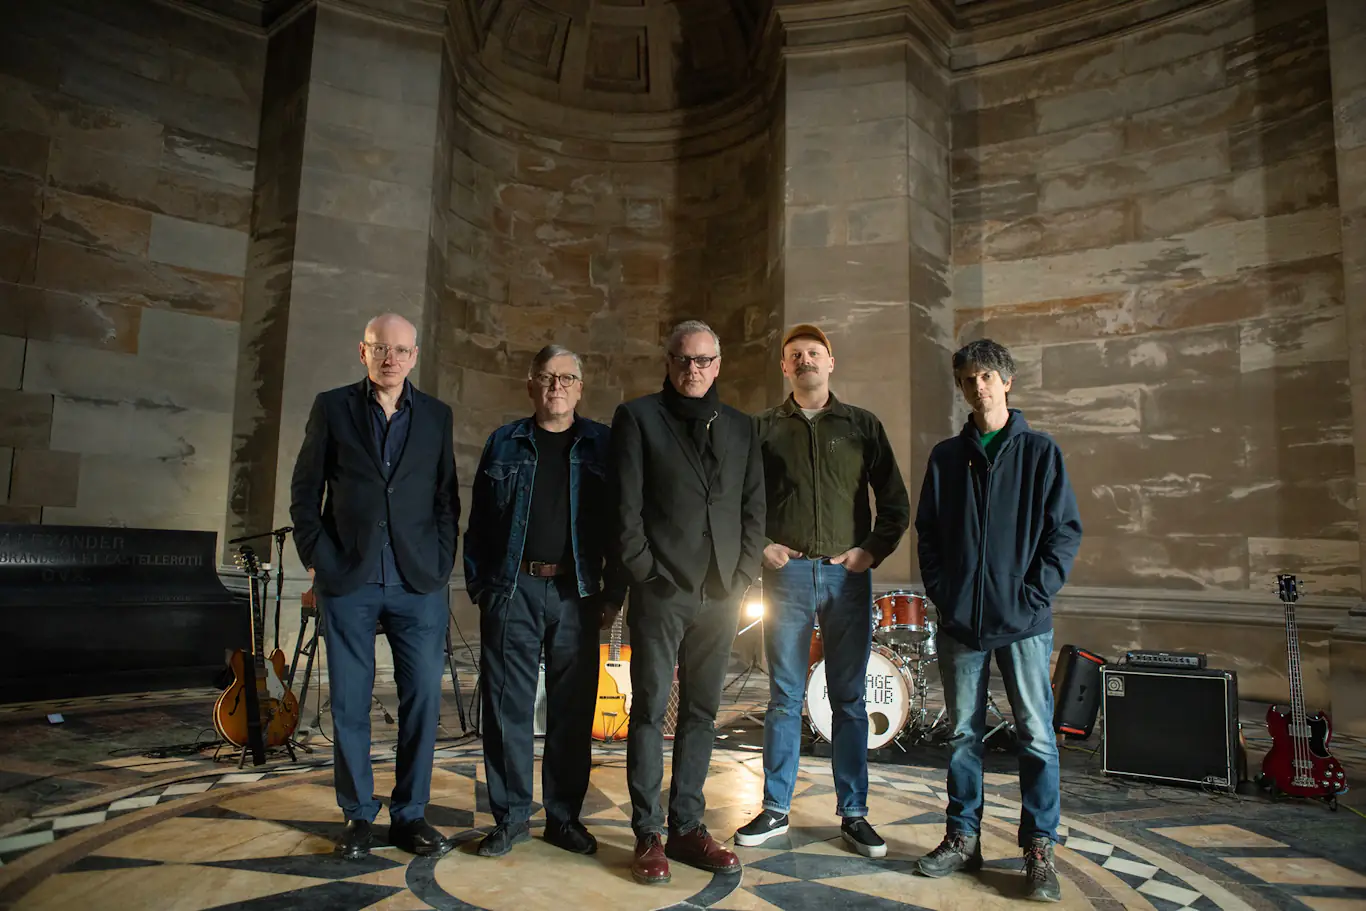 TEENAGE FANCLUB announce new album, ‘Nothing Lasts Forever’ – Hear lead track ‘Foreign Land’